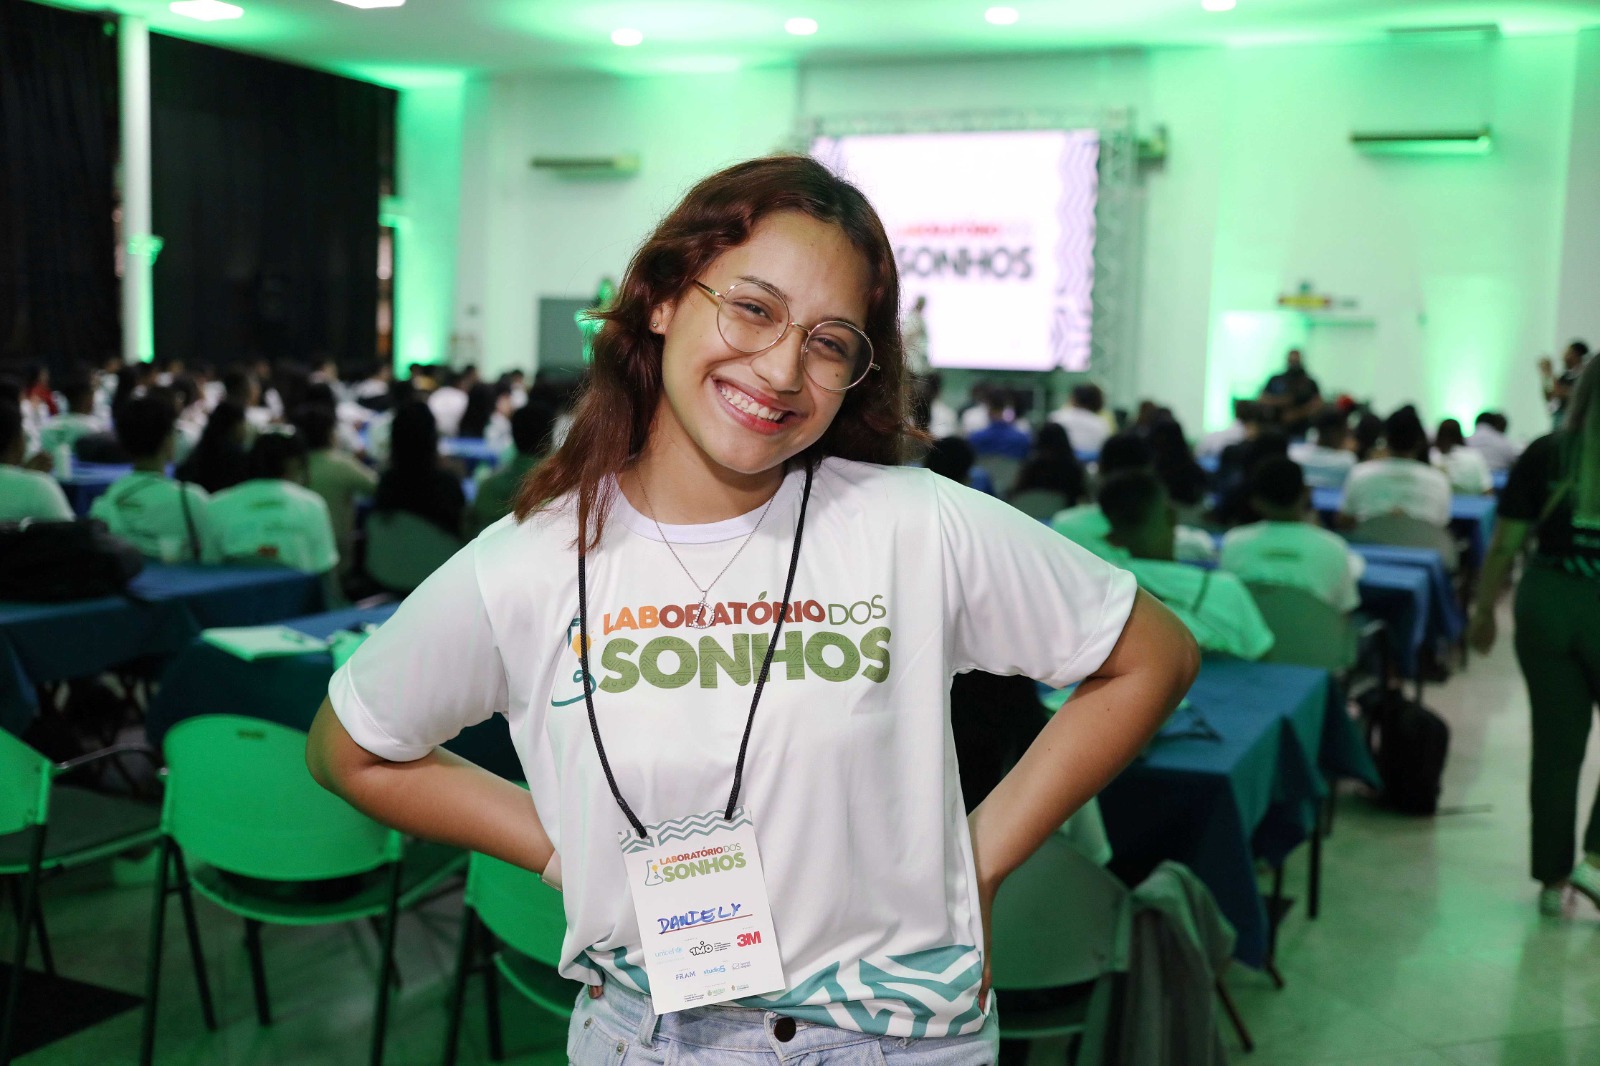 Students from the East Zone of Manaus participate in ‘Laboratory of Dreams’